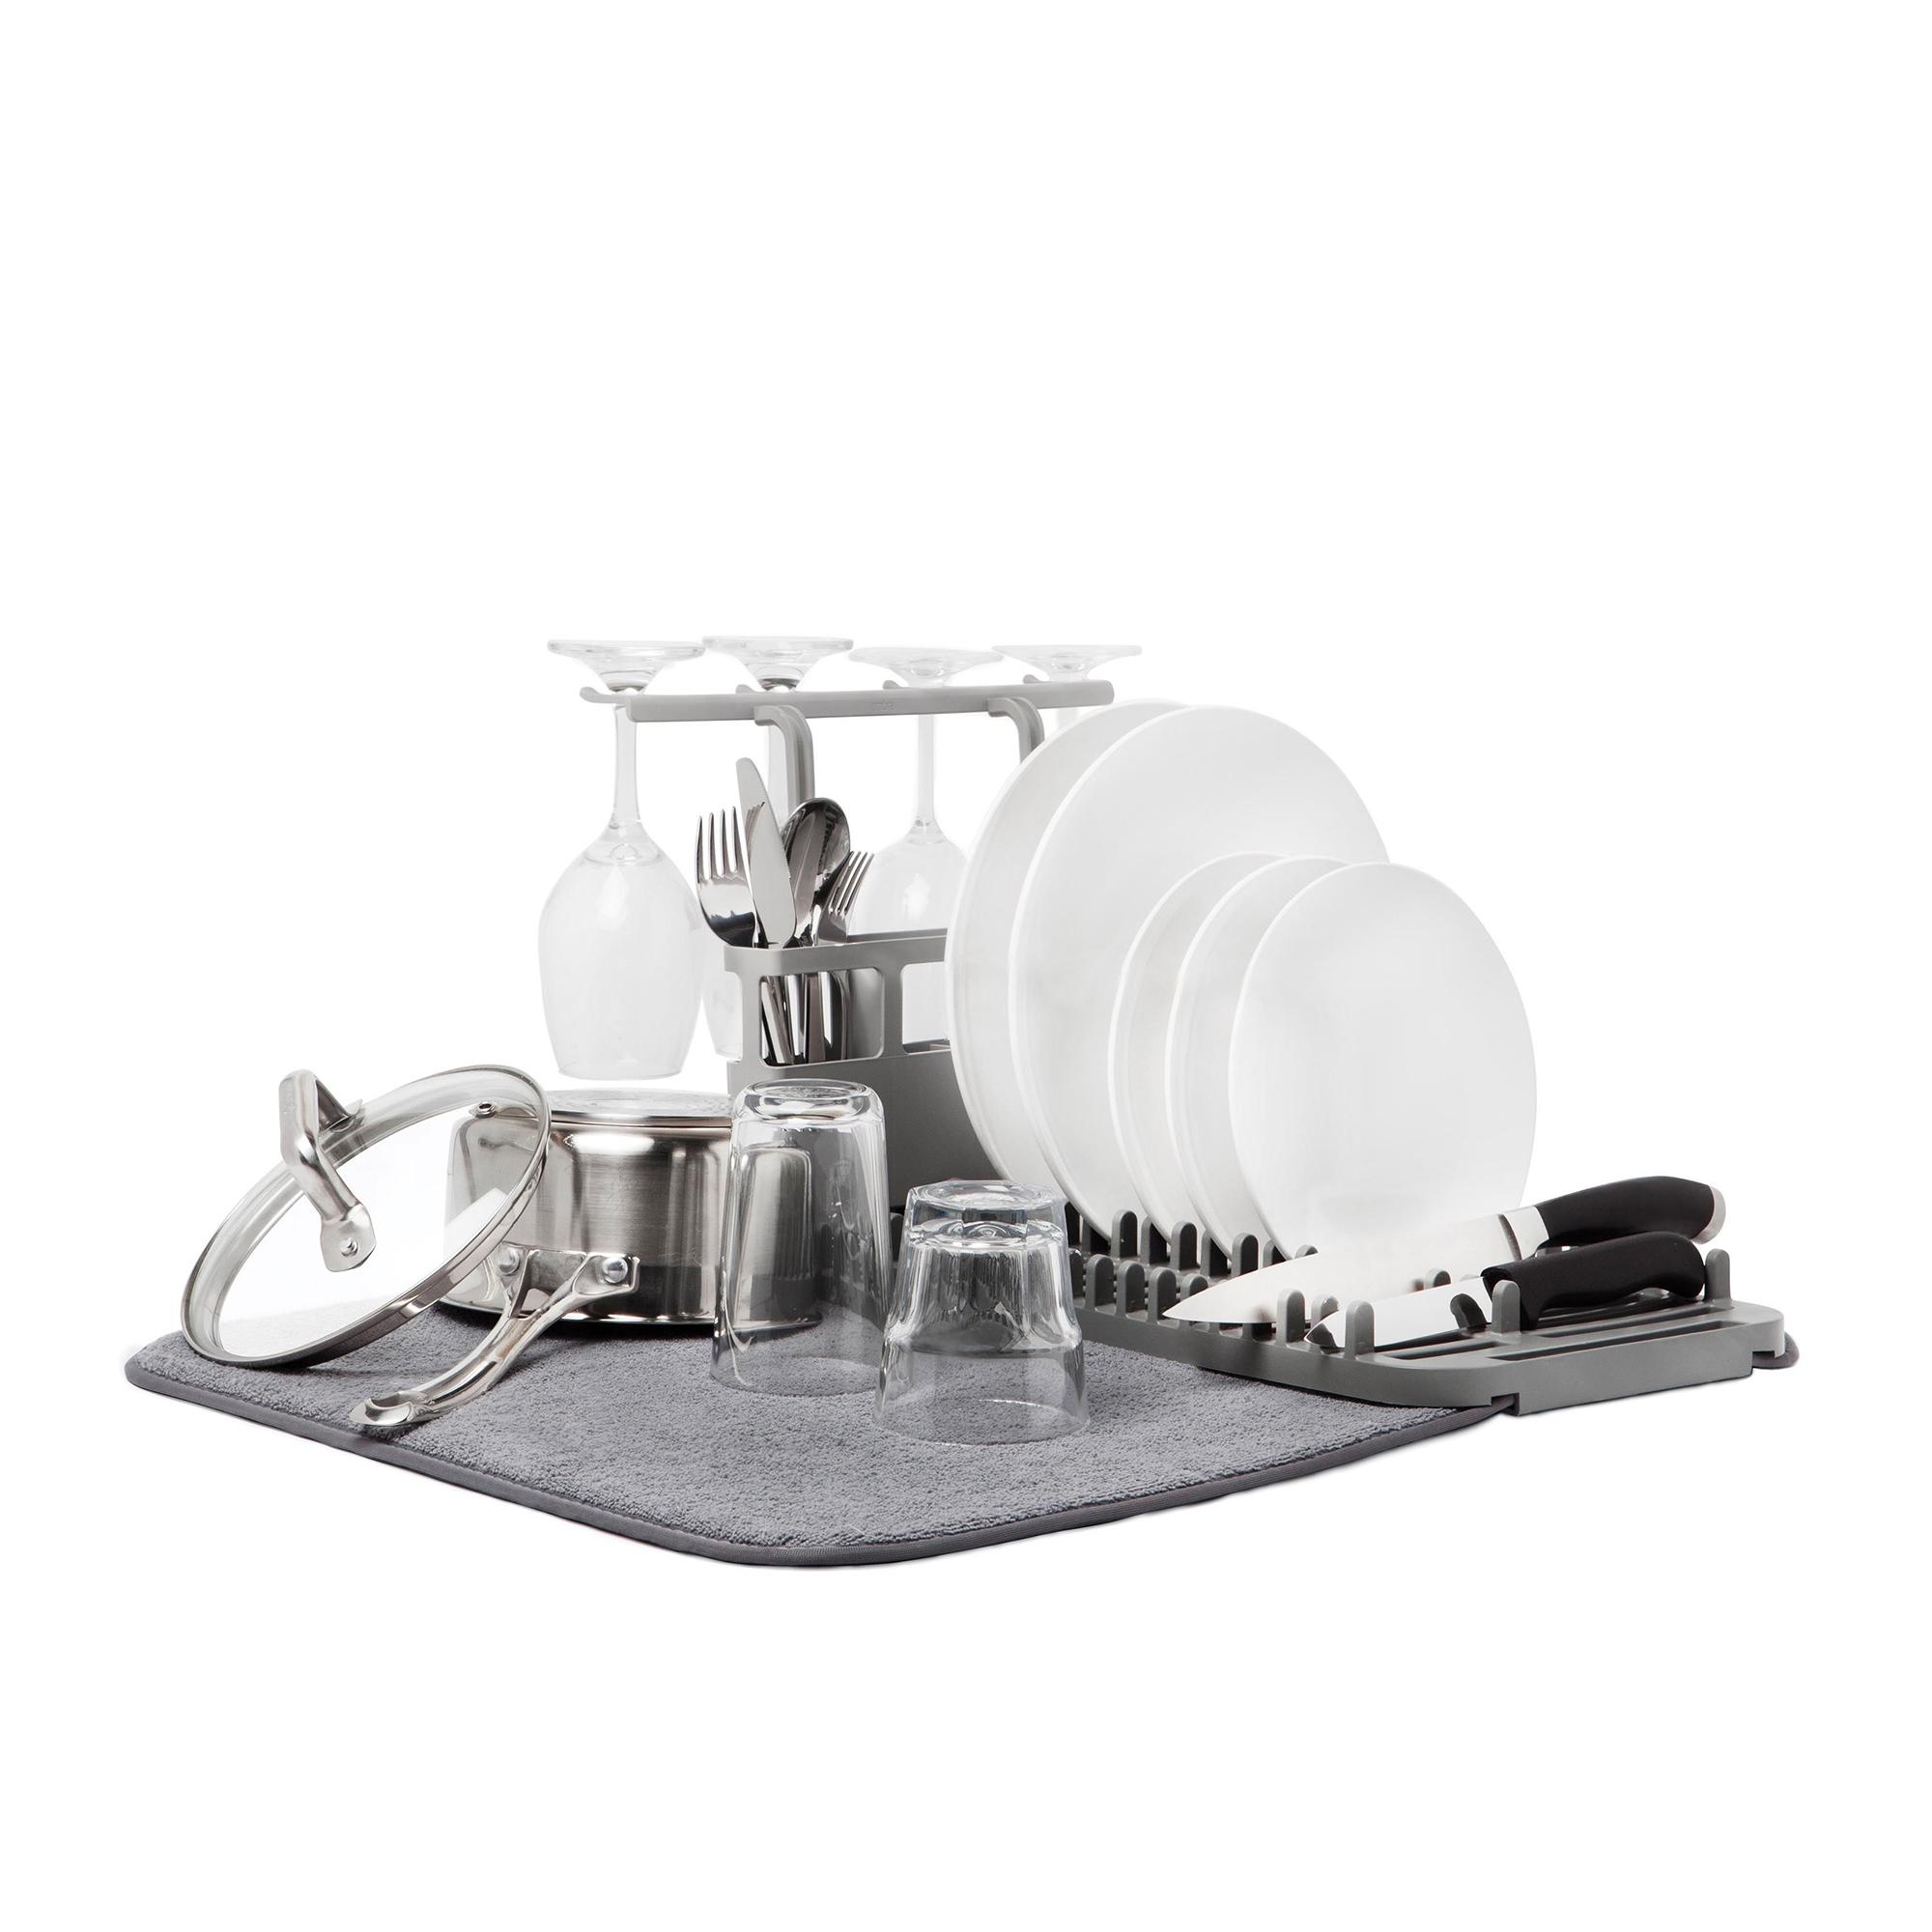 Umbra UDry Dish Rack with Drying Mat Charcoal Image 3